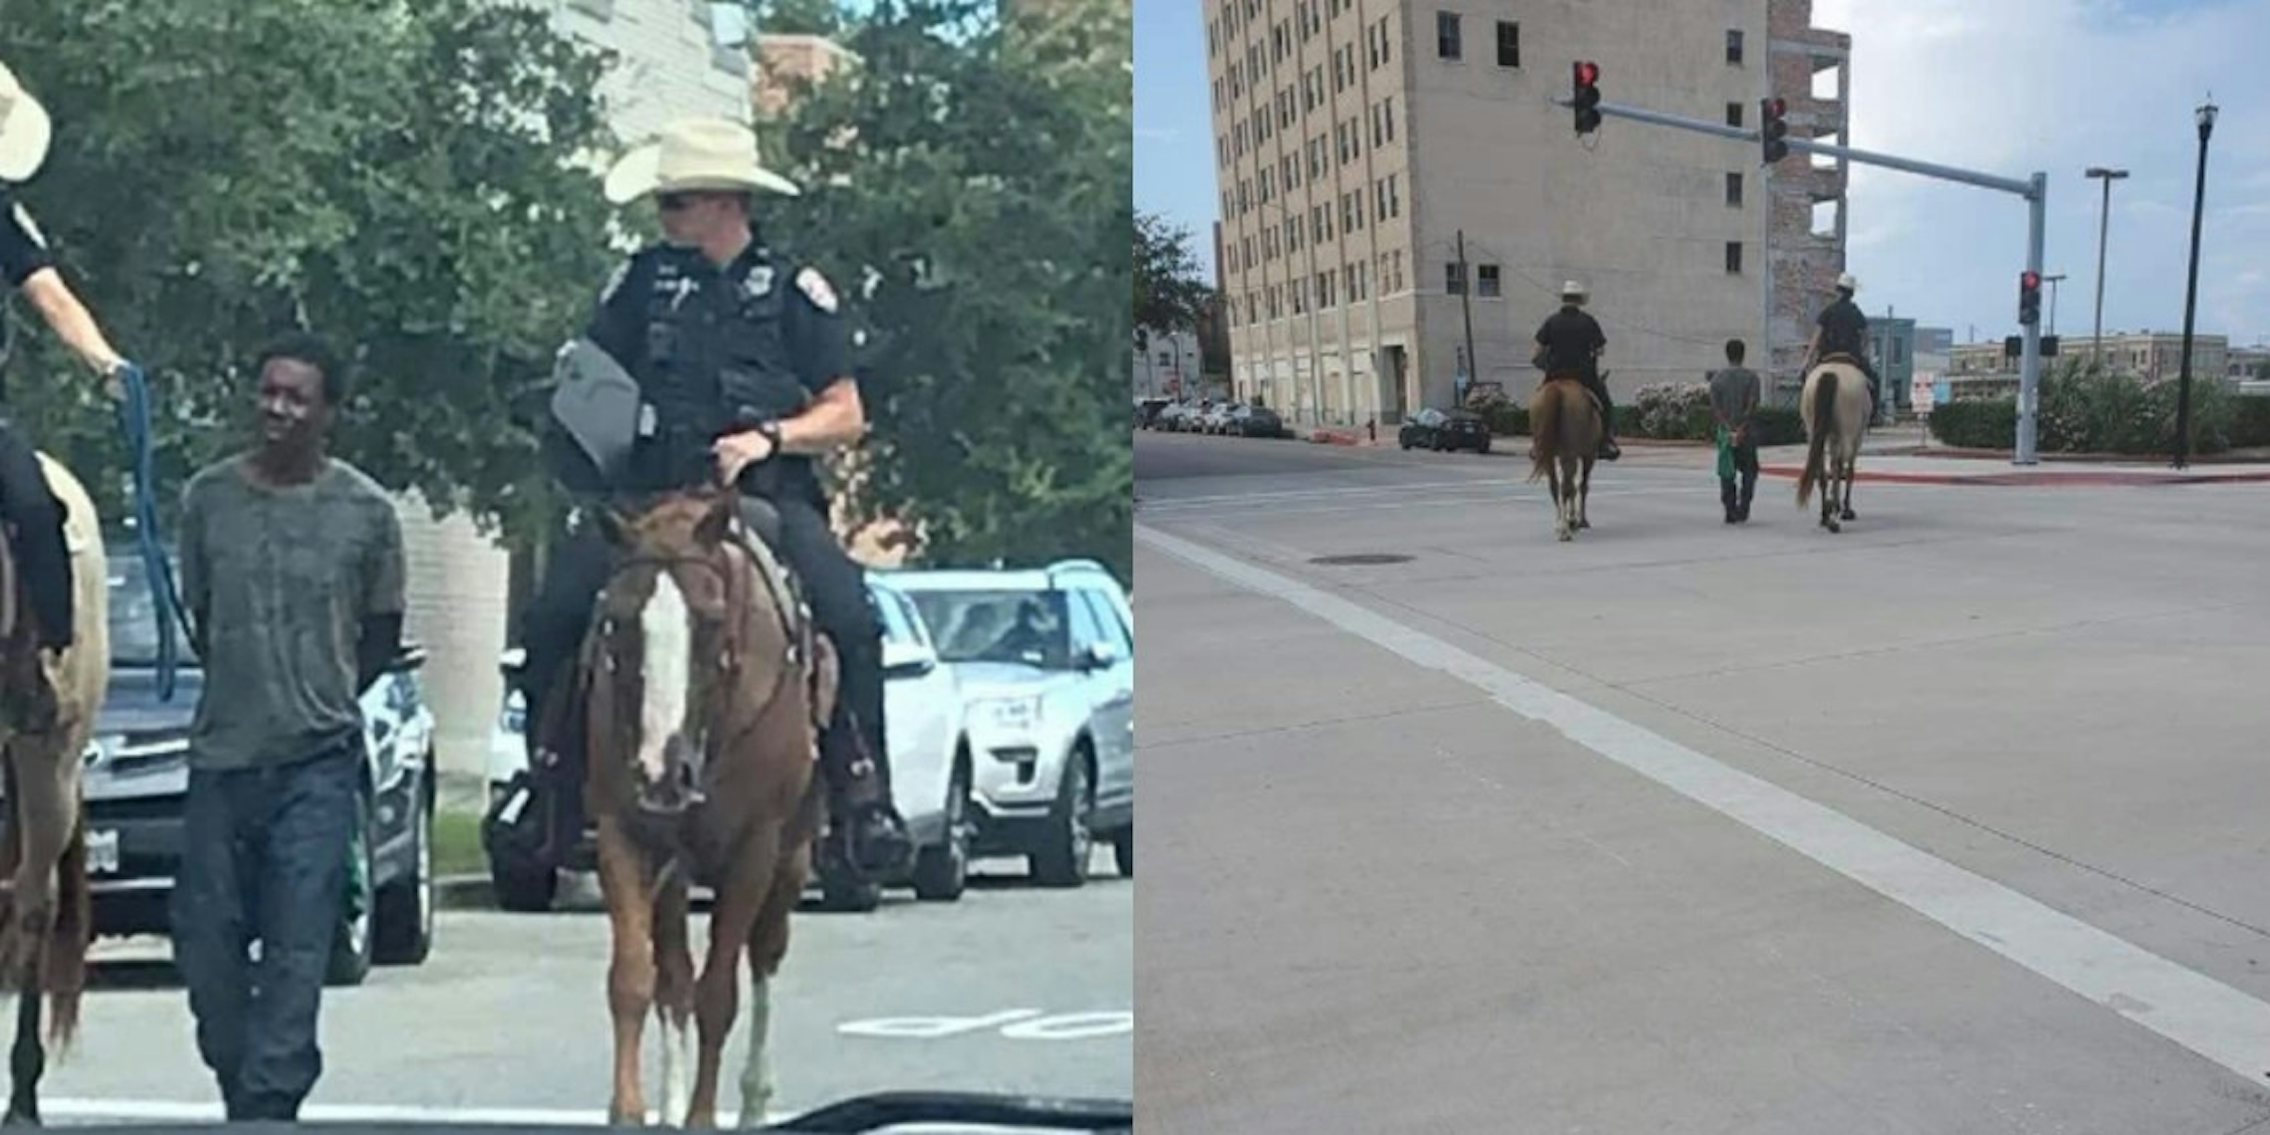 Image on the left shows two Texas police on horses escorting a Black man in handcuffs and a leash on the street; the photo on the right shows them from the back, and a red leash attached to the man's hand from the back